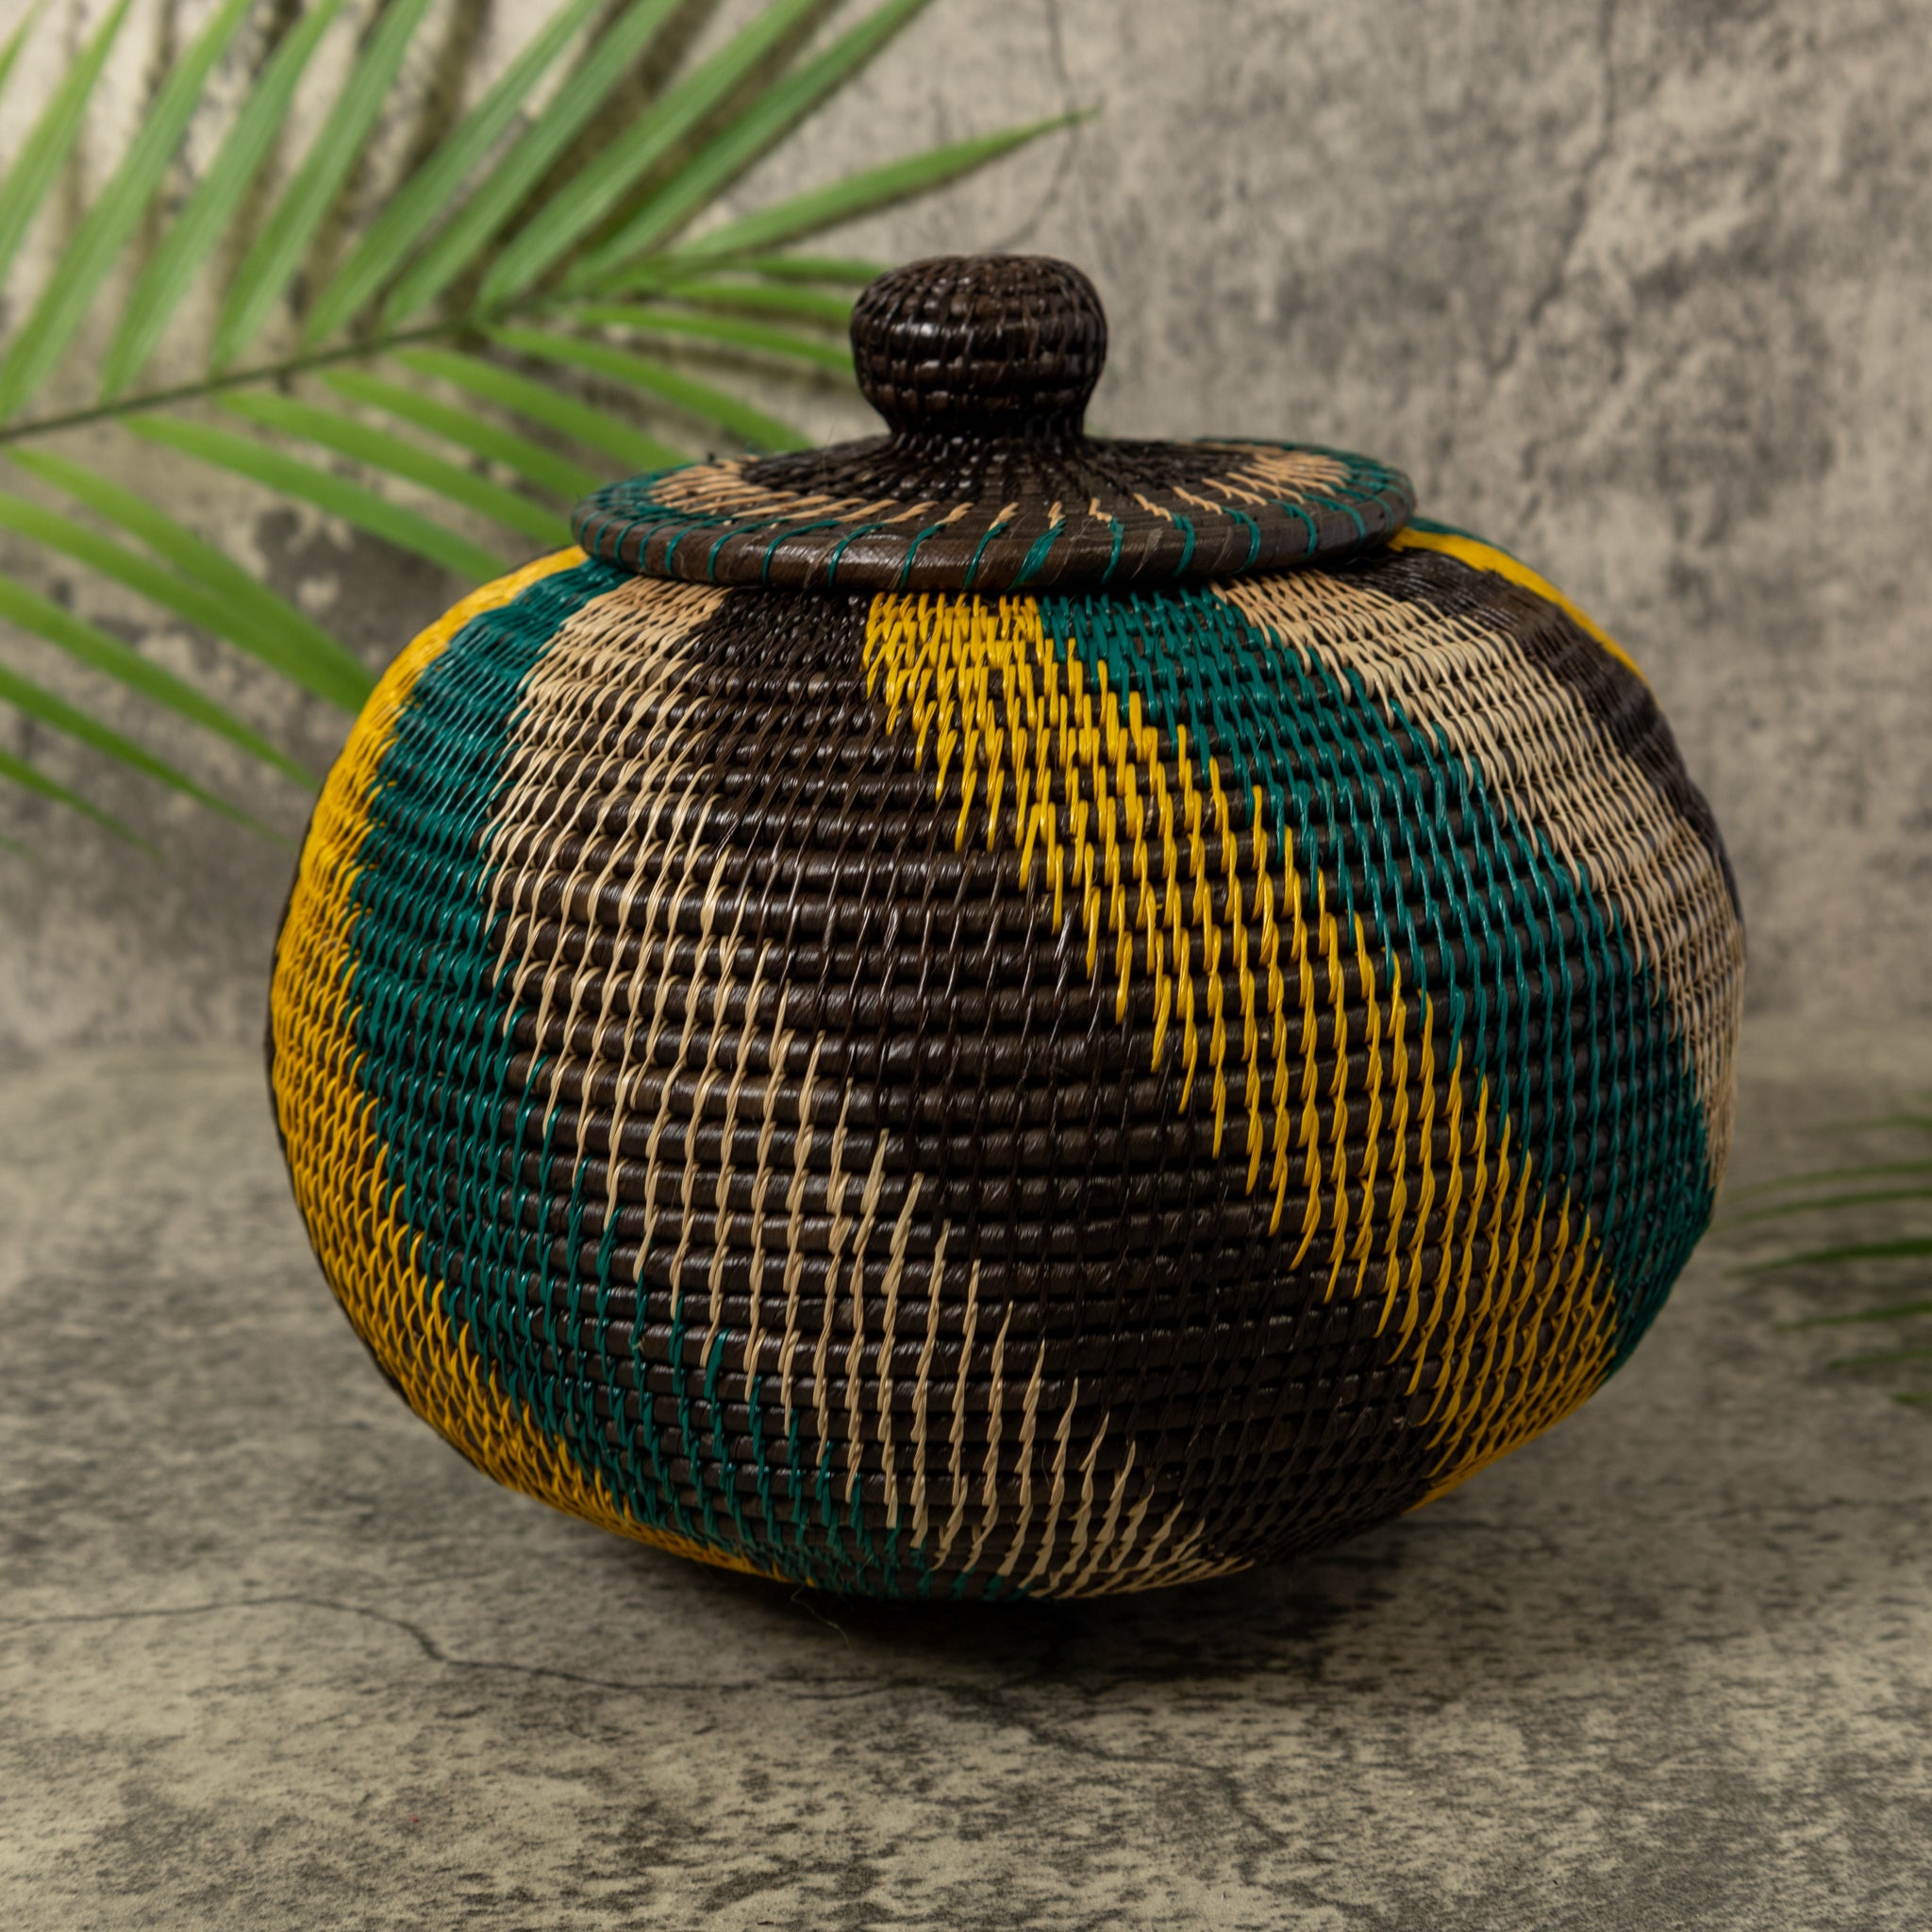 Green Yellow Black And Gray Spiral Rainforest Basket With Top